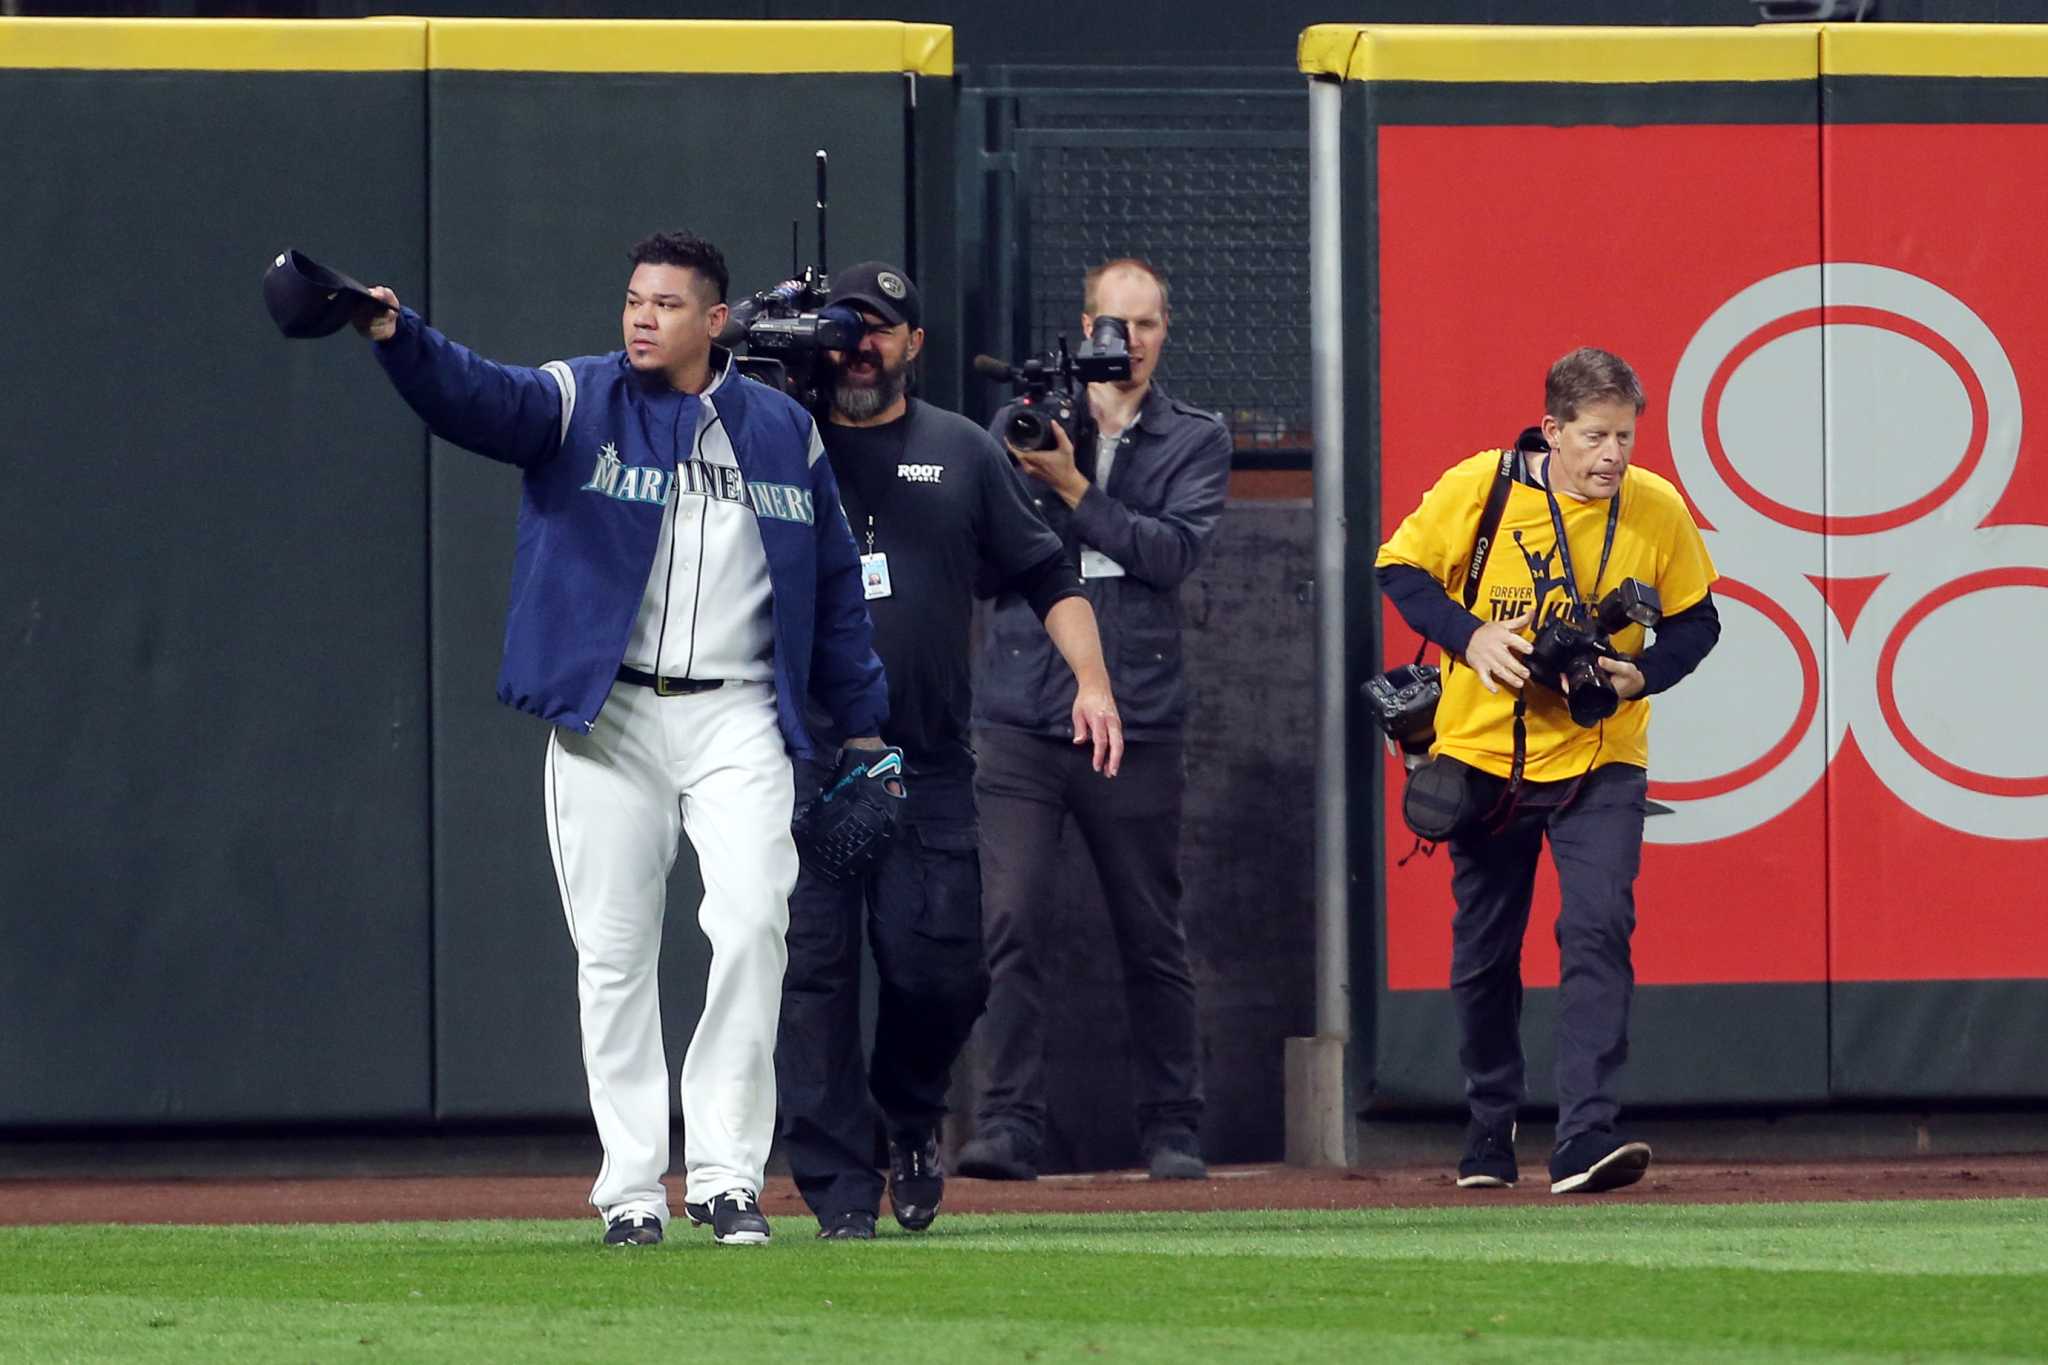 Cover Boy — King Felix on ESPN The Magazine, by Mariners PR